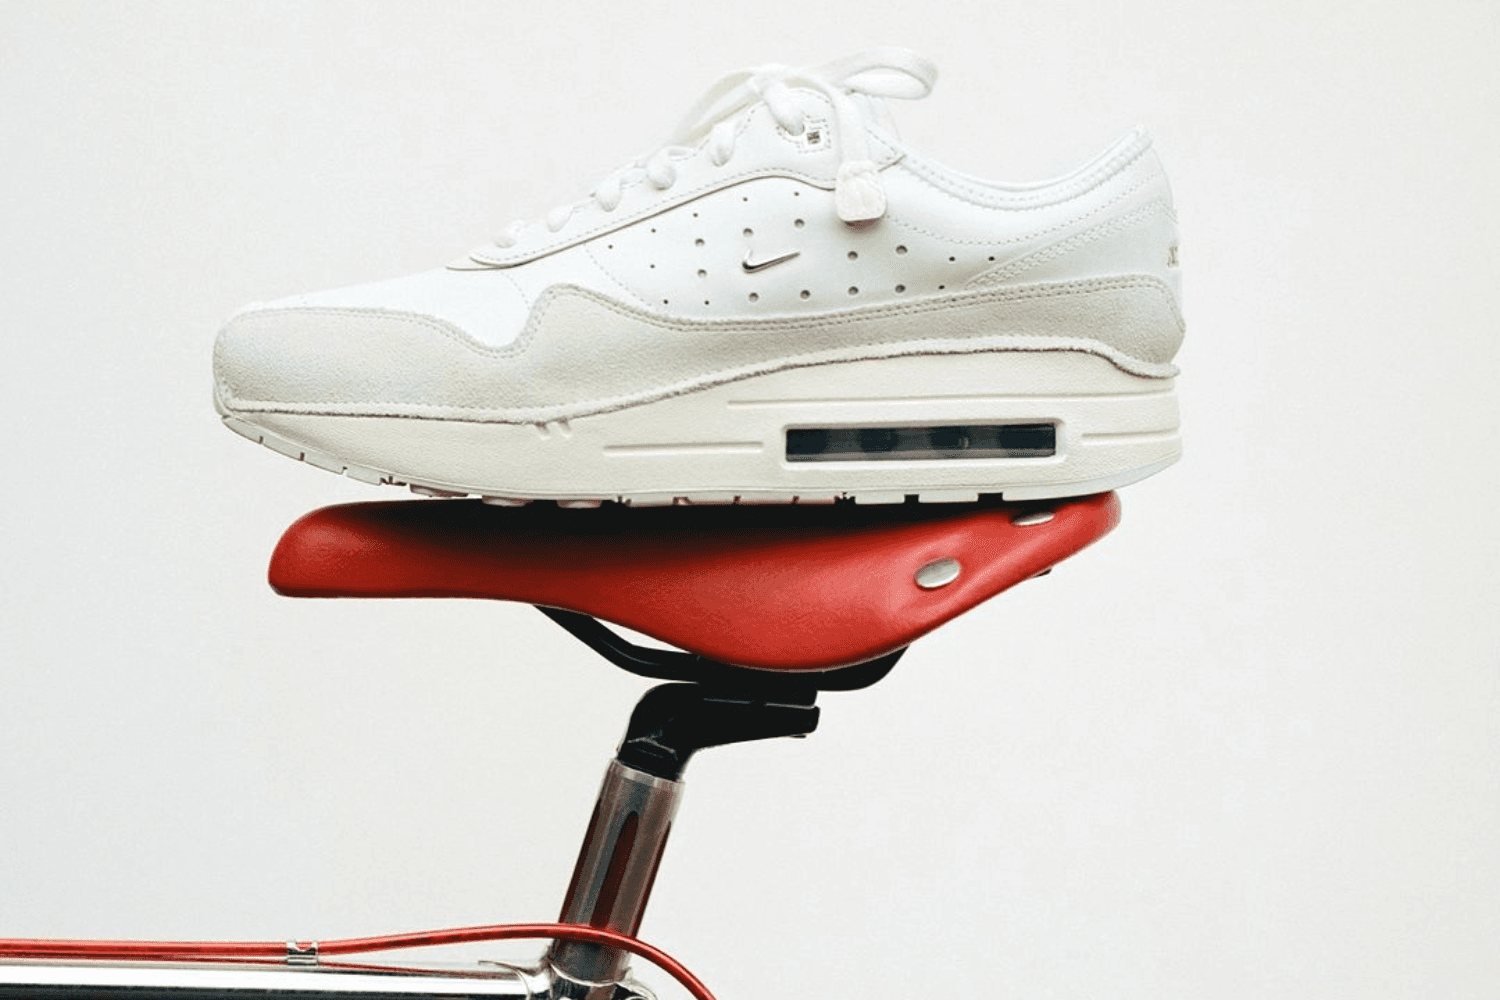 The Jacquemus x Nike Air Max 1 '86 is finally here